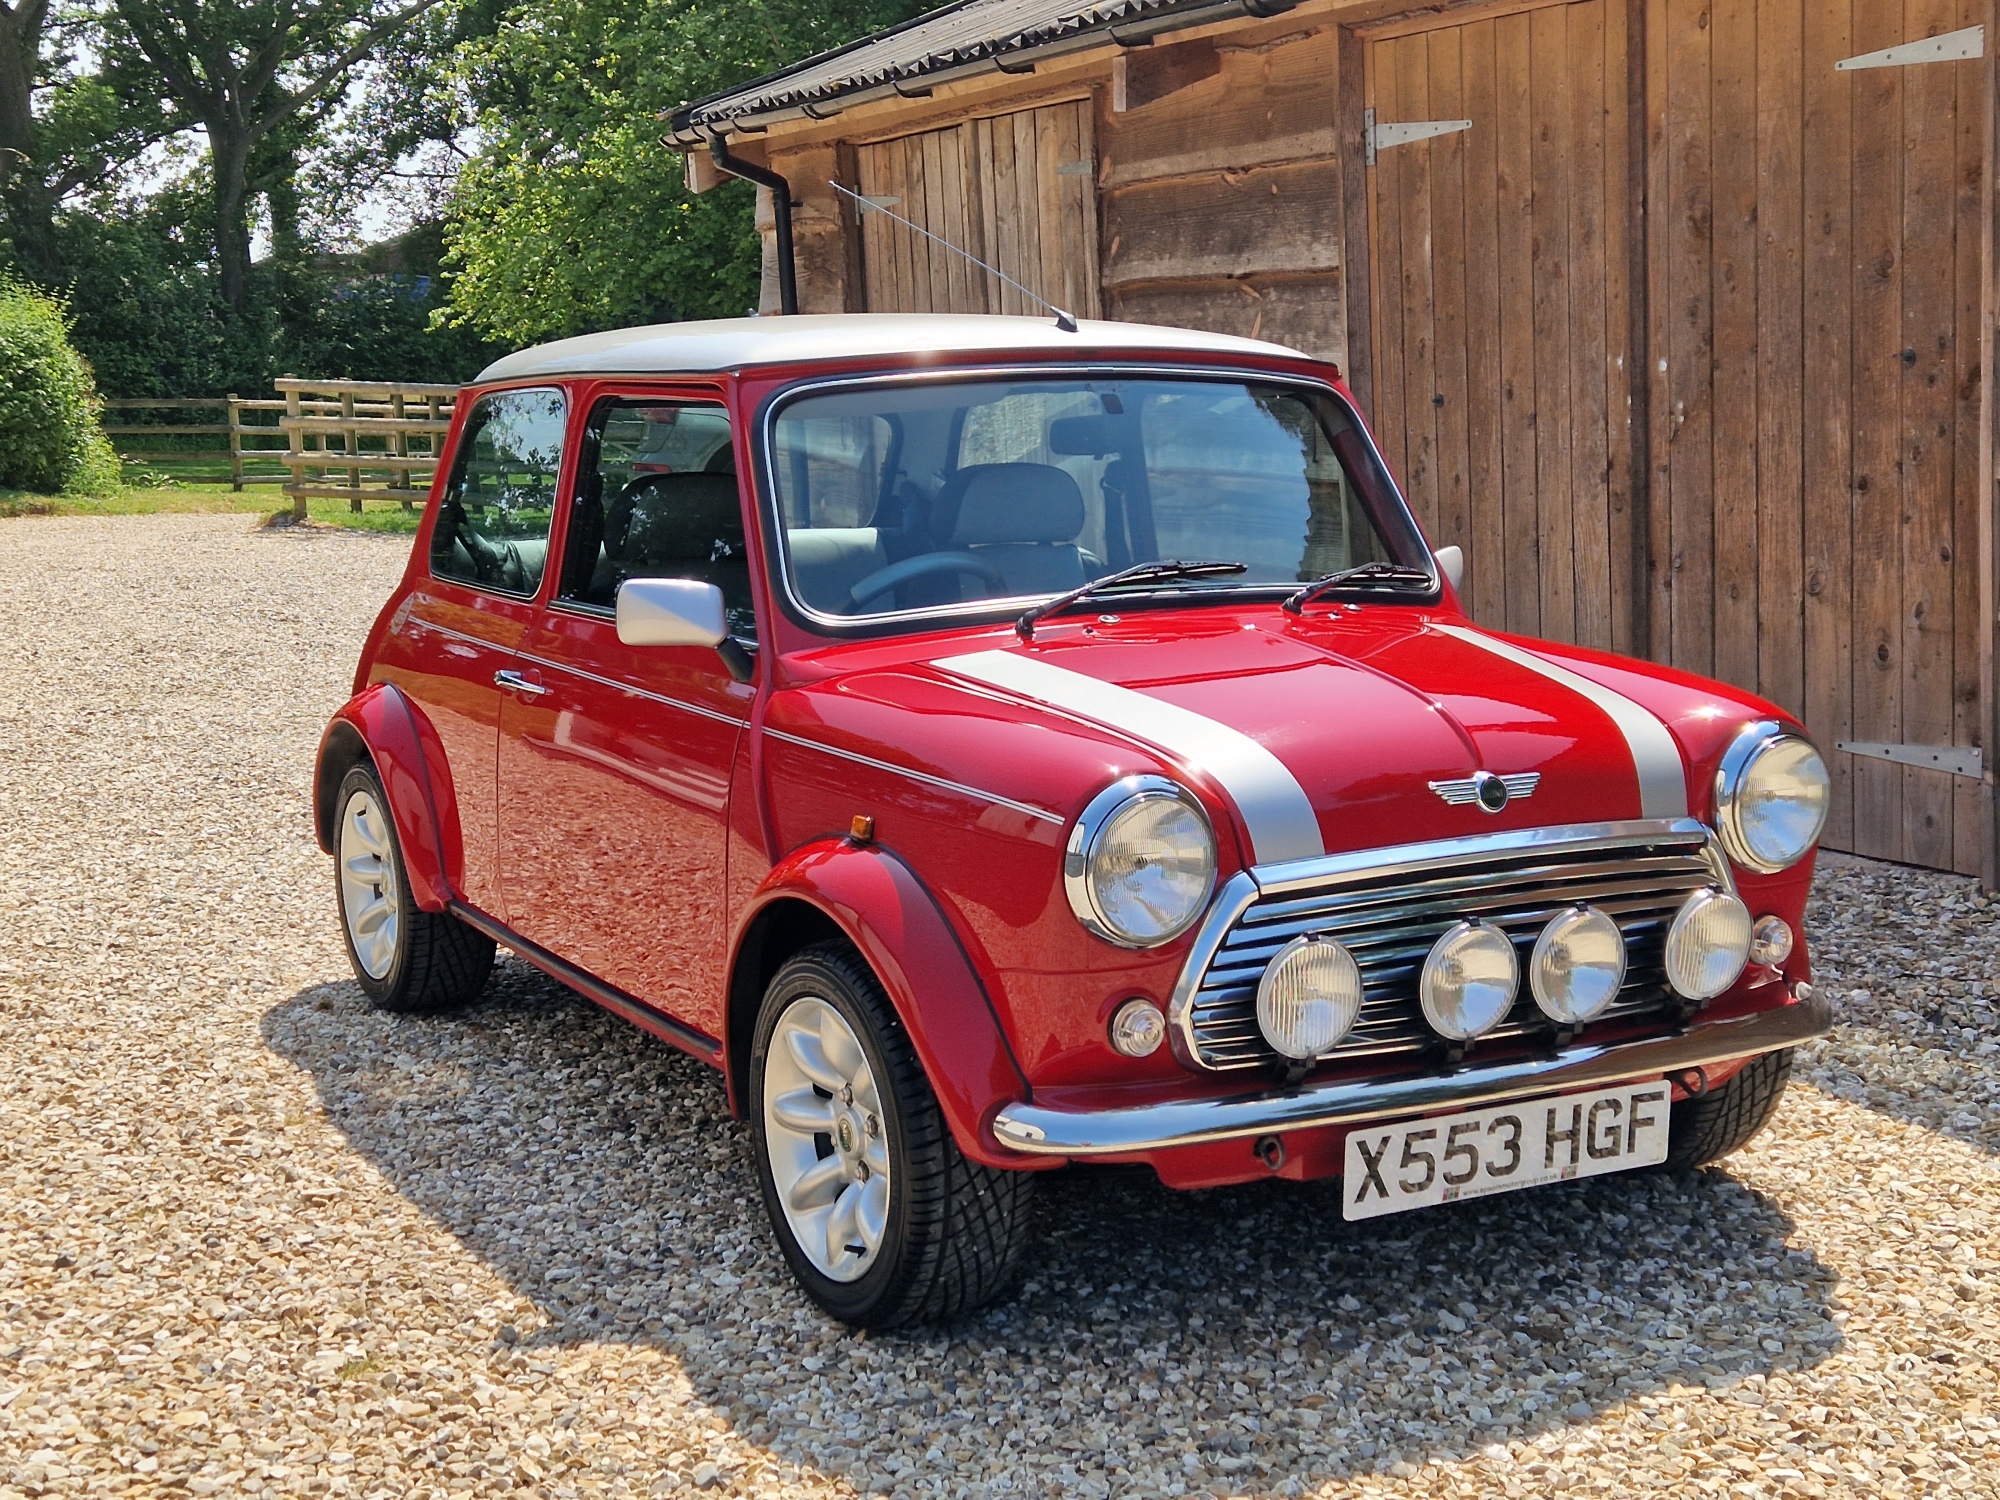 ** DEPOSIT PAID ** 2000 Rover Mini Cooper Sport On Just 18550 Miles From New!!